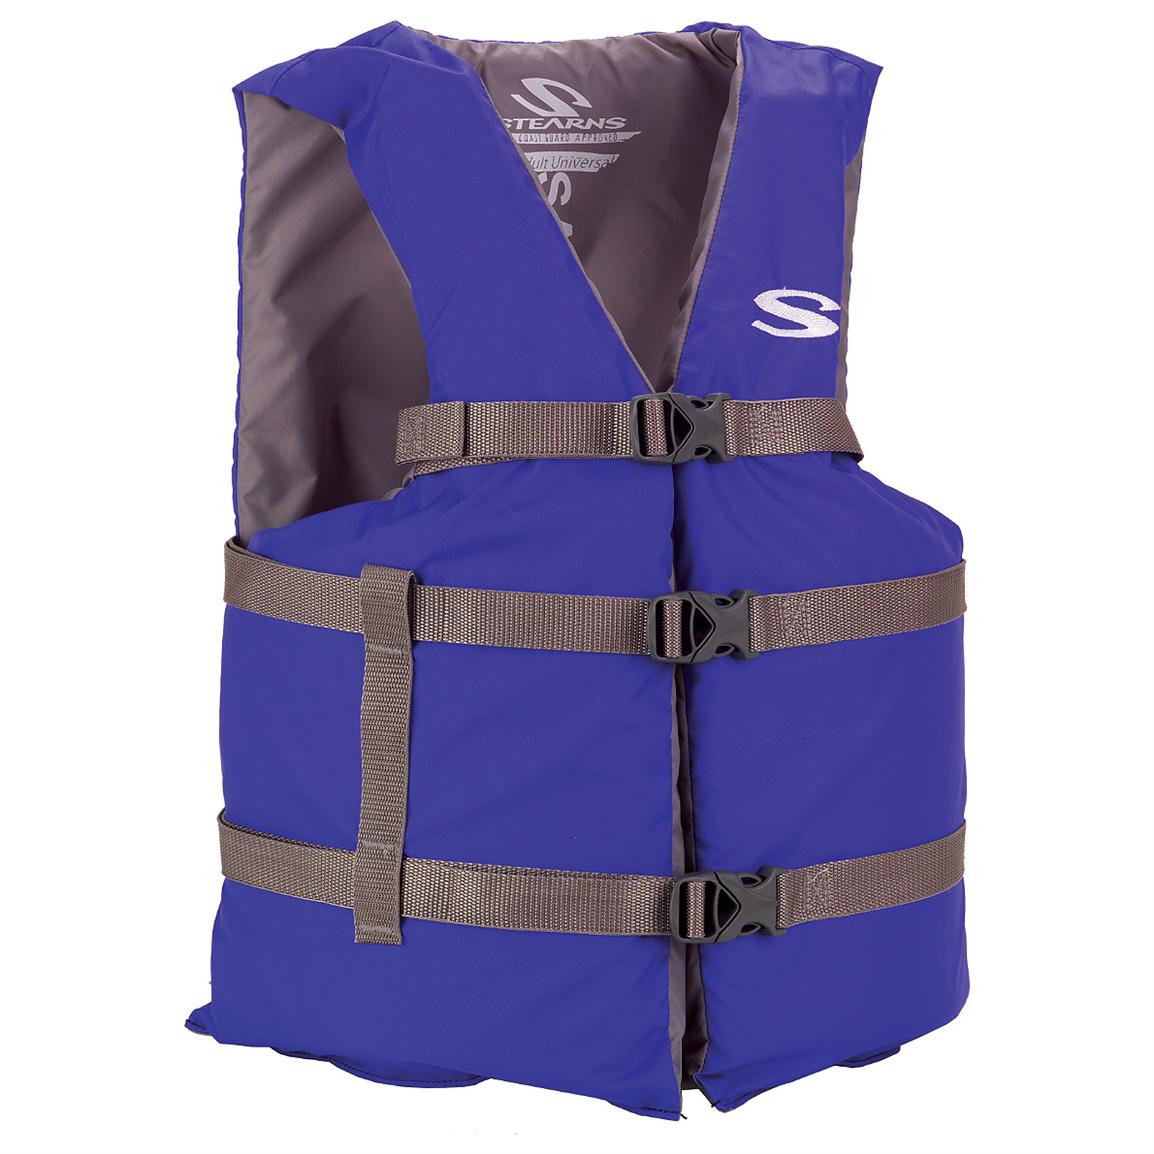 Stearns Adult Classic Series Life Jacket - 178376, Universal Life Vests